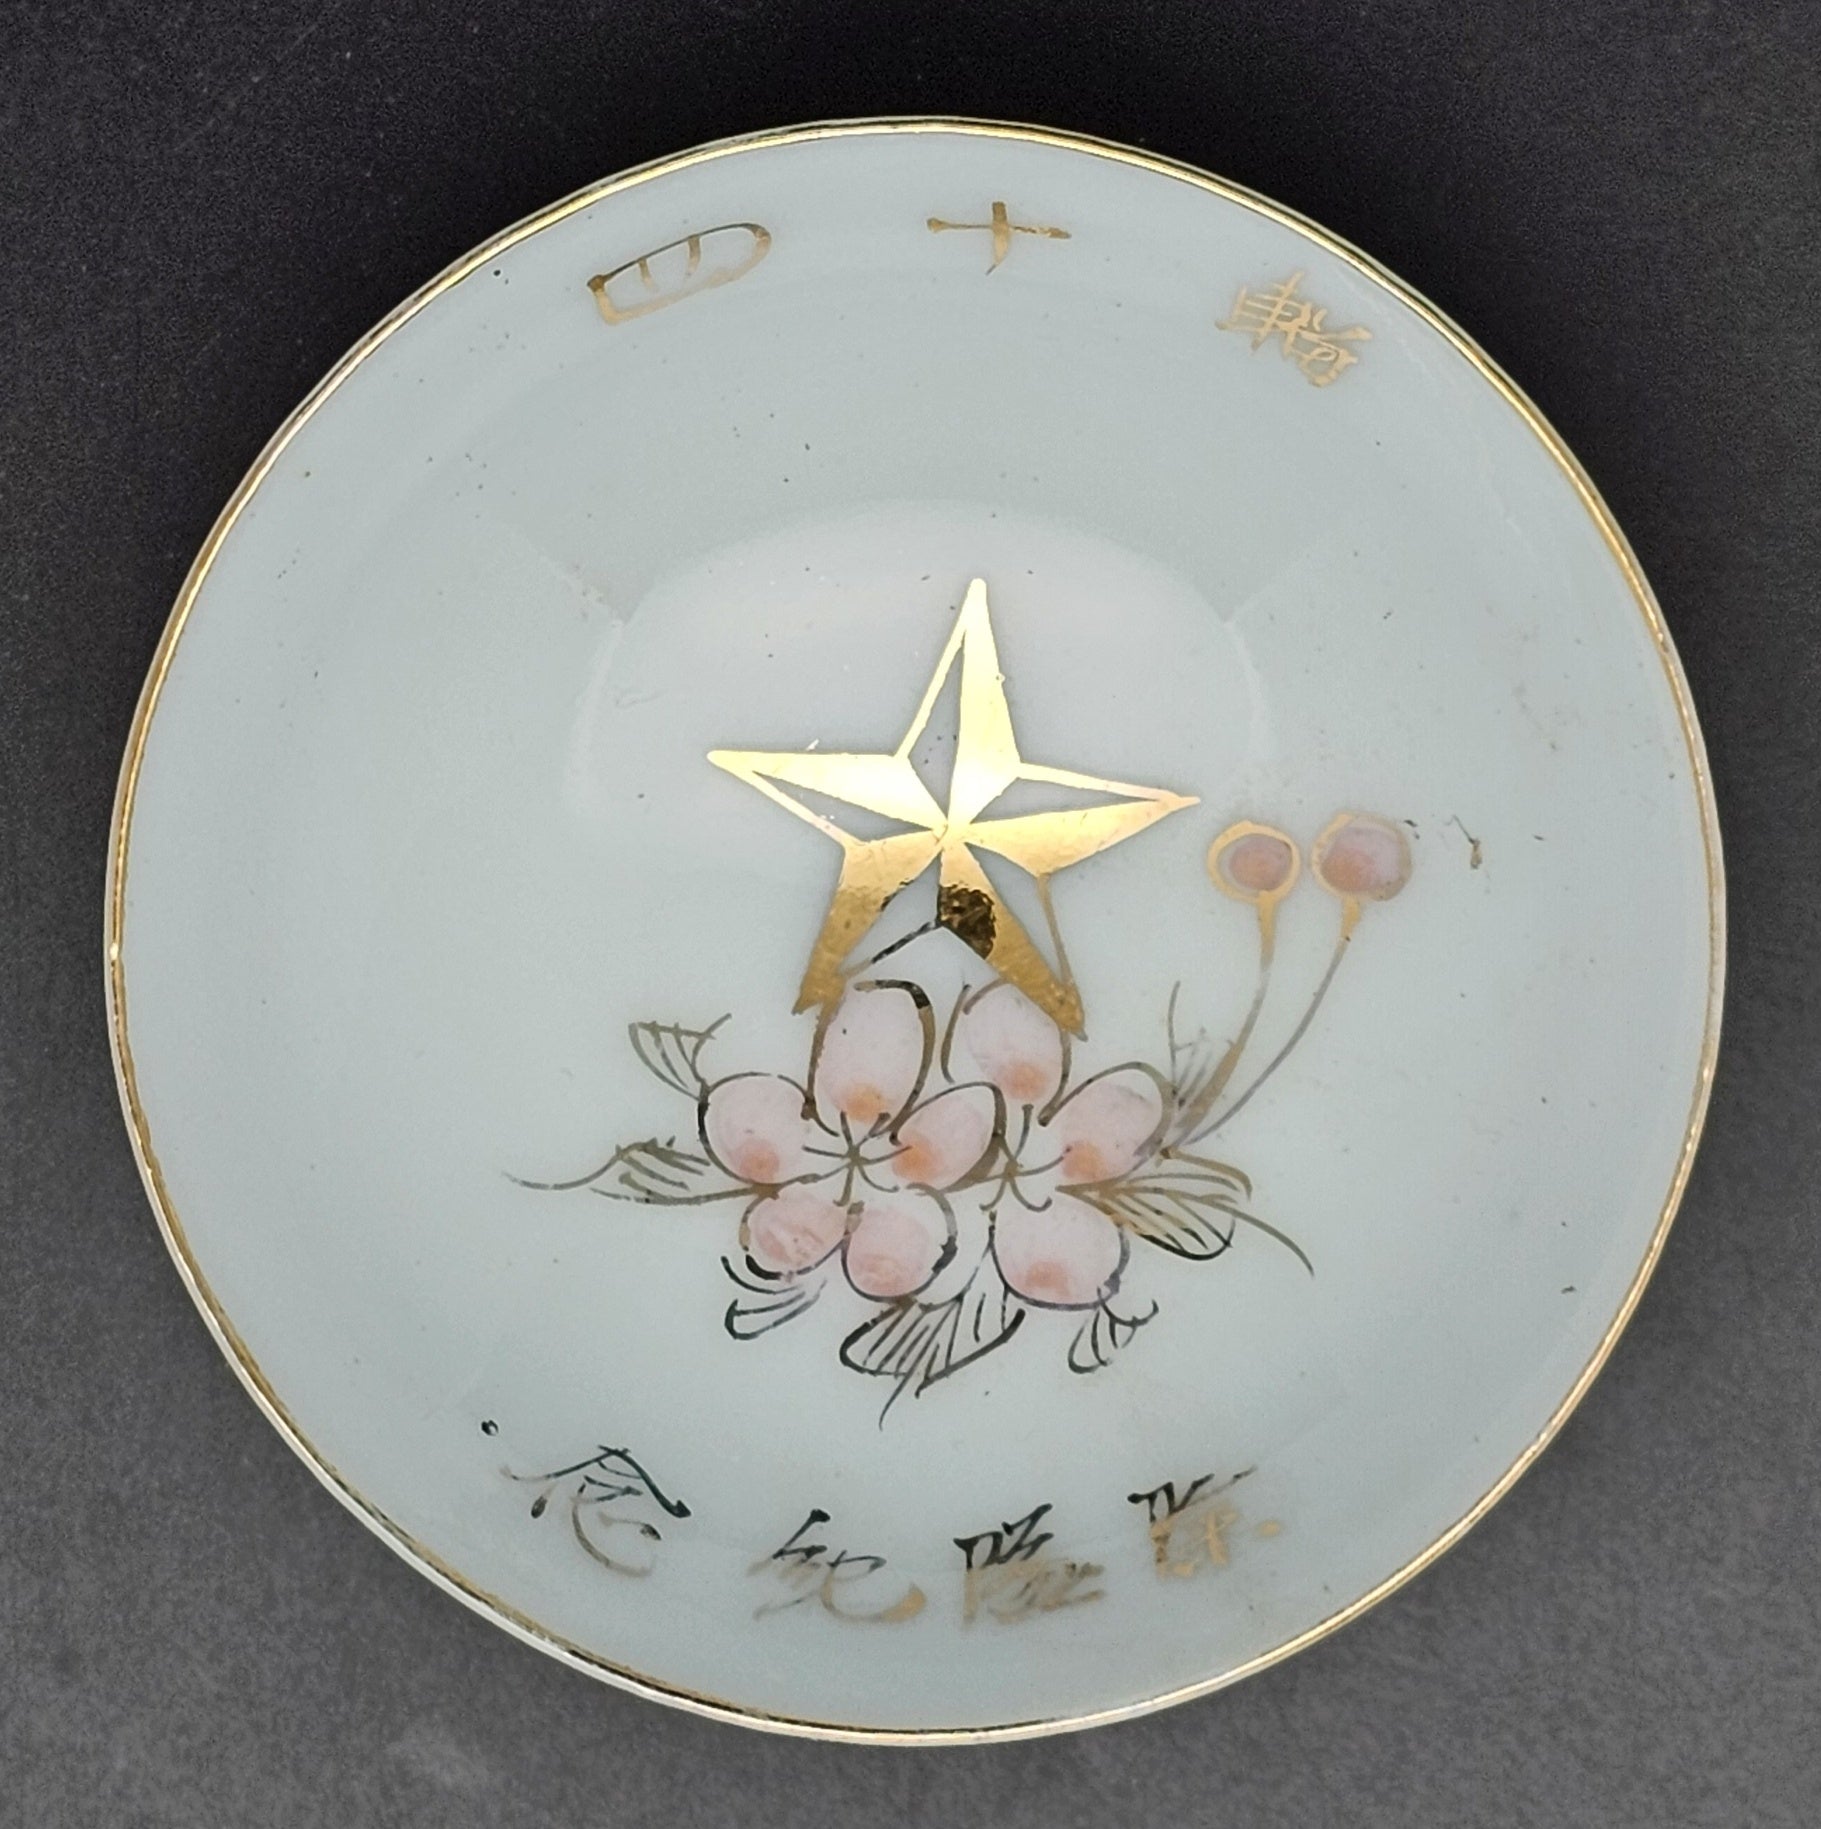 Antique Japanese Military Cherry Blossom Star Transport Army Sake Cup